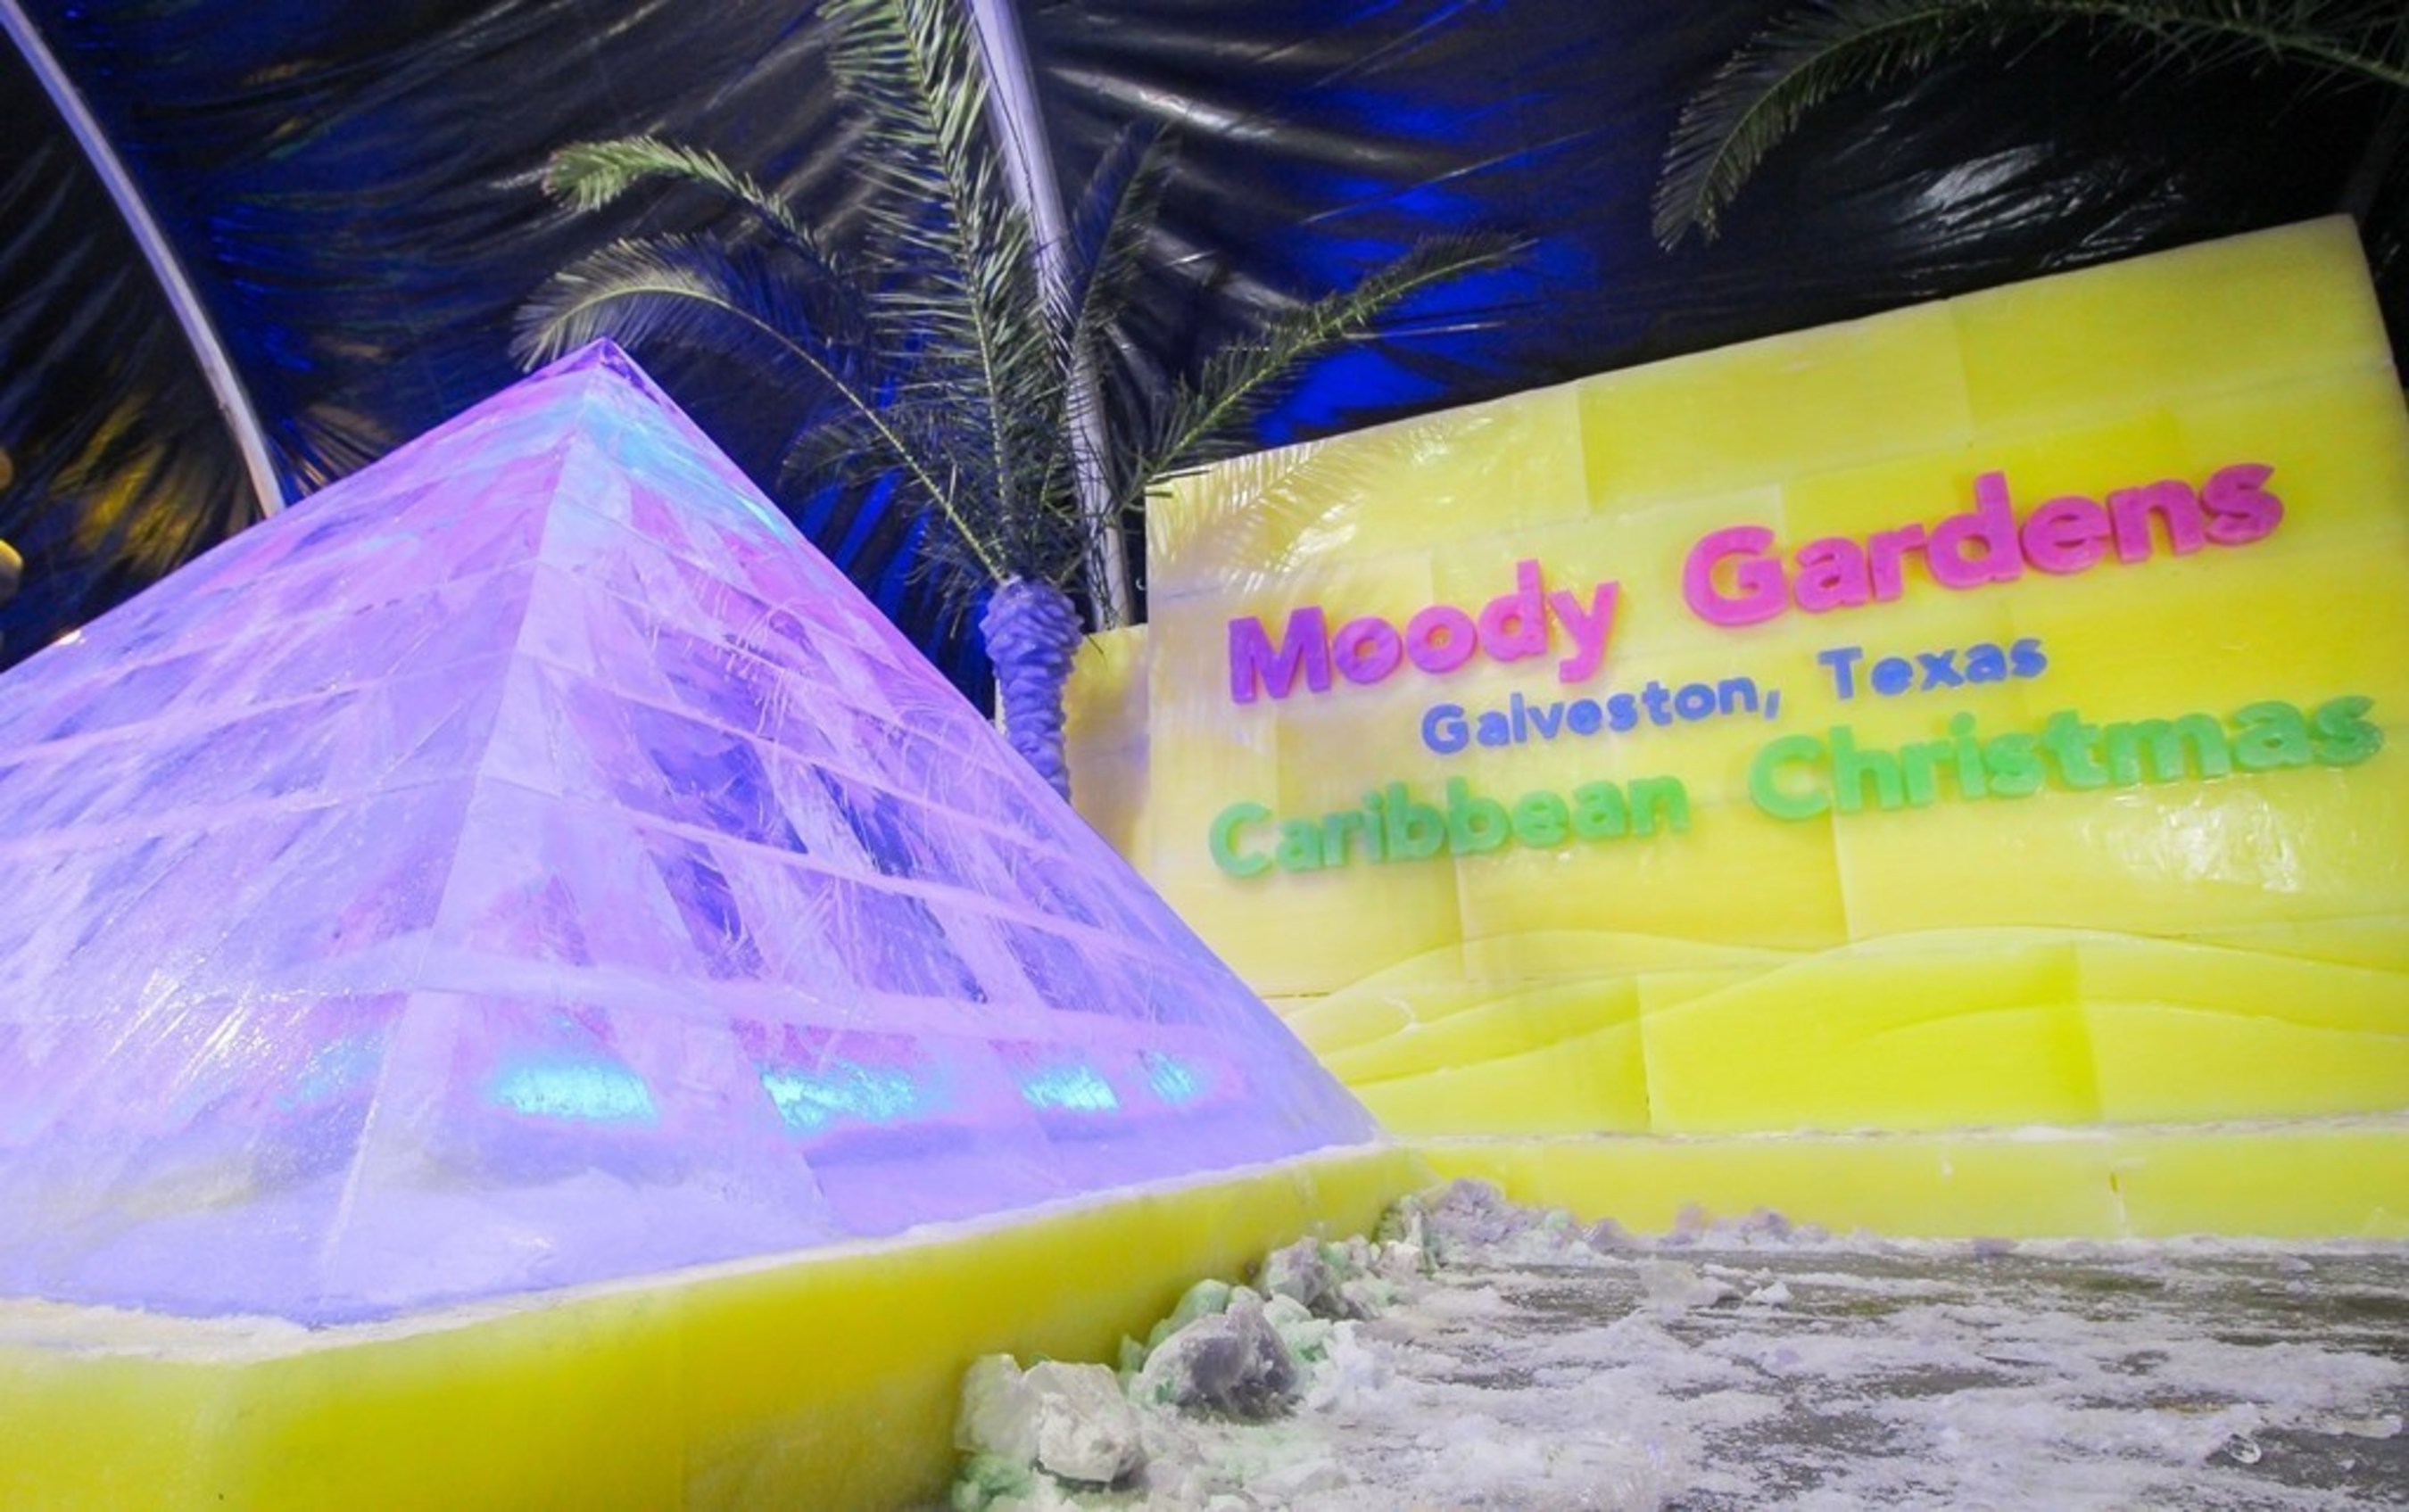 A team of ice carvers from Harbin, China is carving 2 million lbs. of ice as Moody Gardens prepares to open "ICE LAND: Ice Sculptures" with a Caribbean Christmas theme for the holiday season November 12 - January 8.